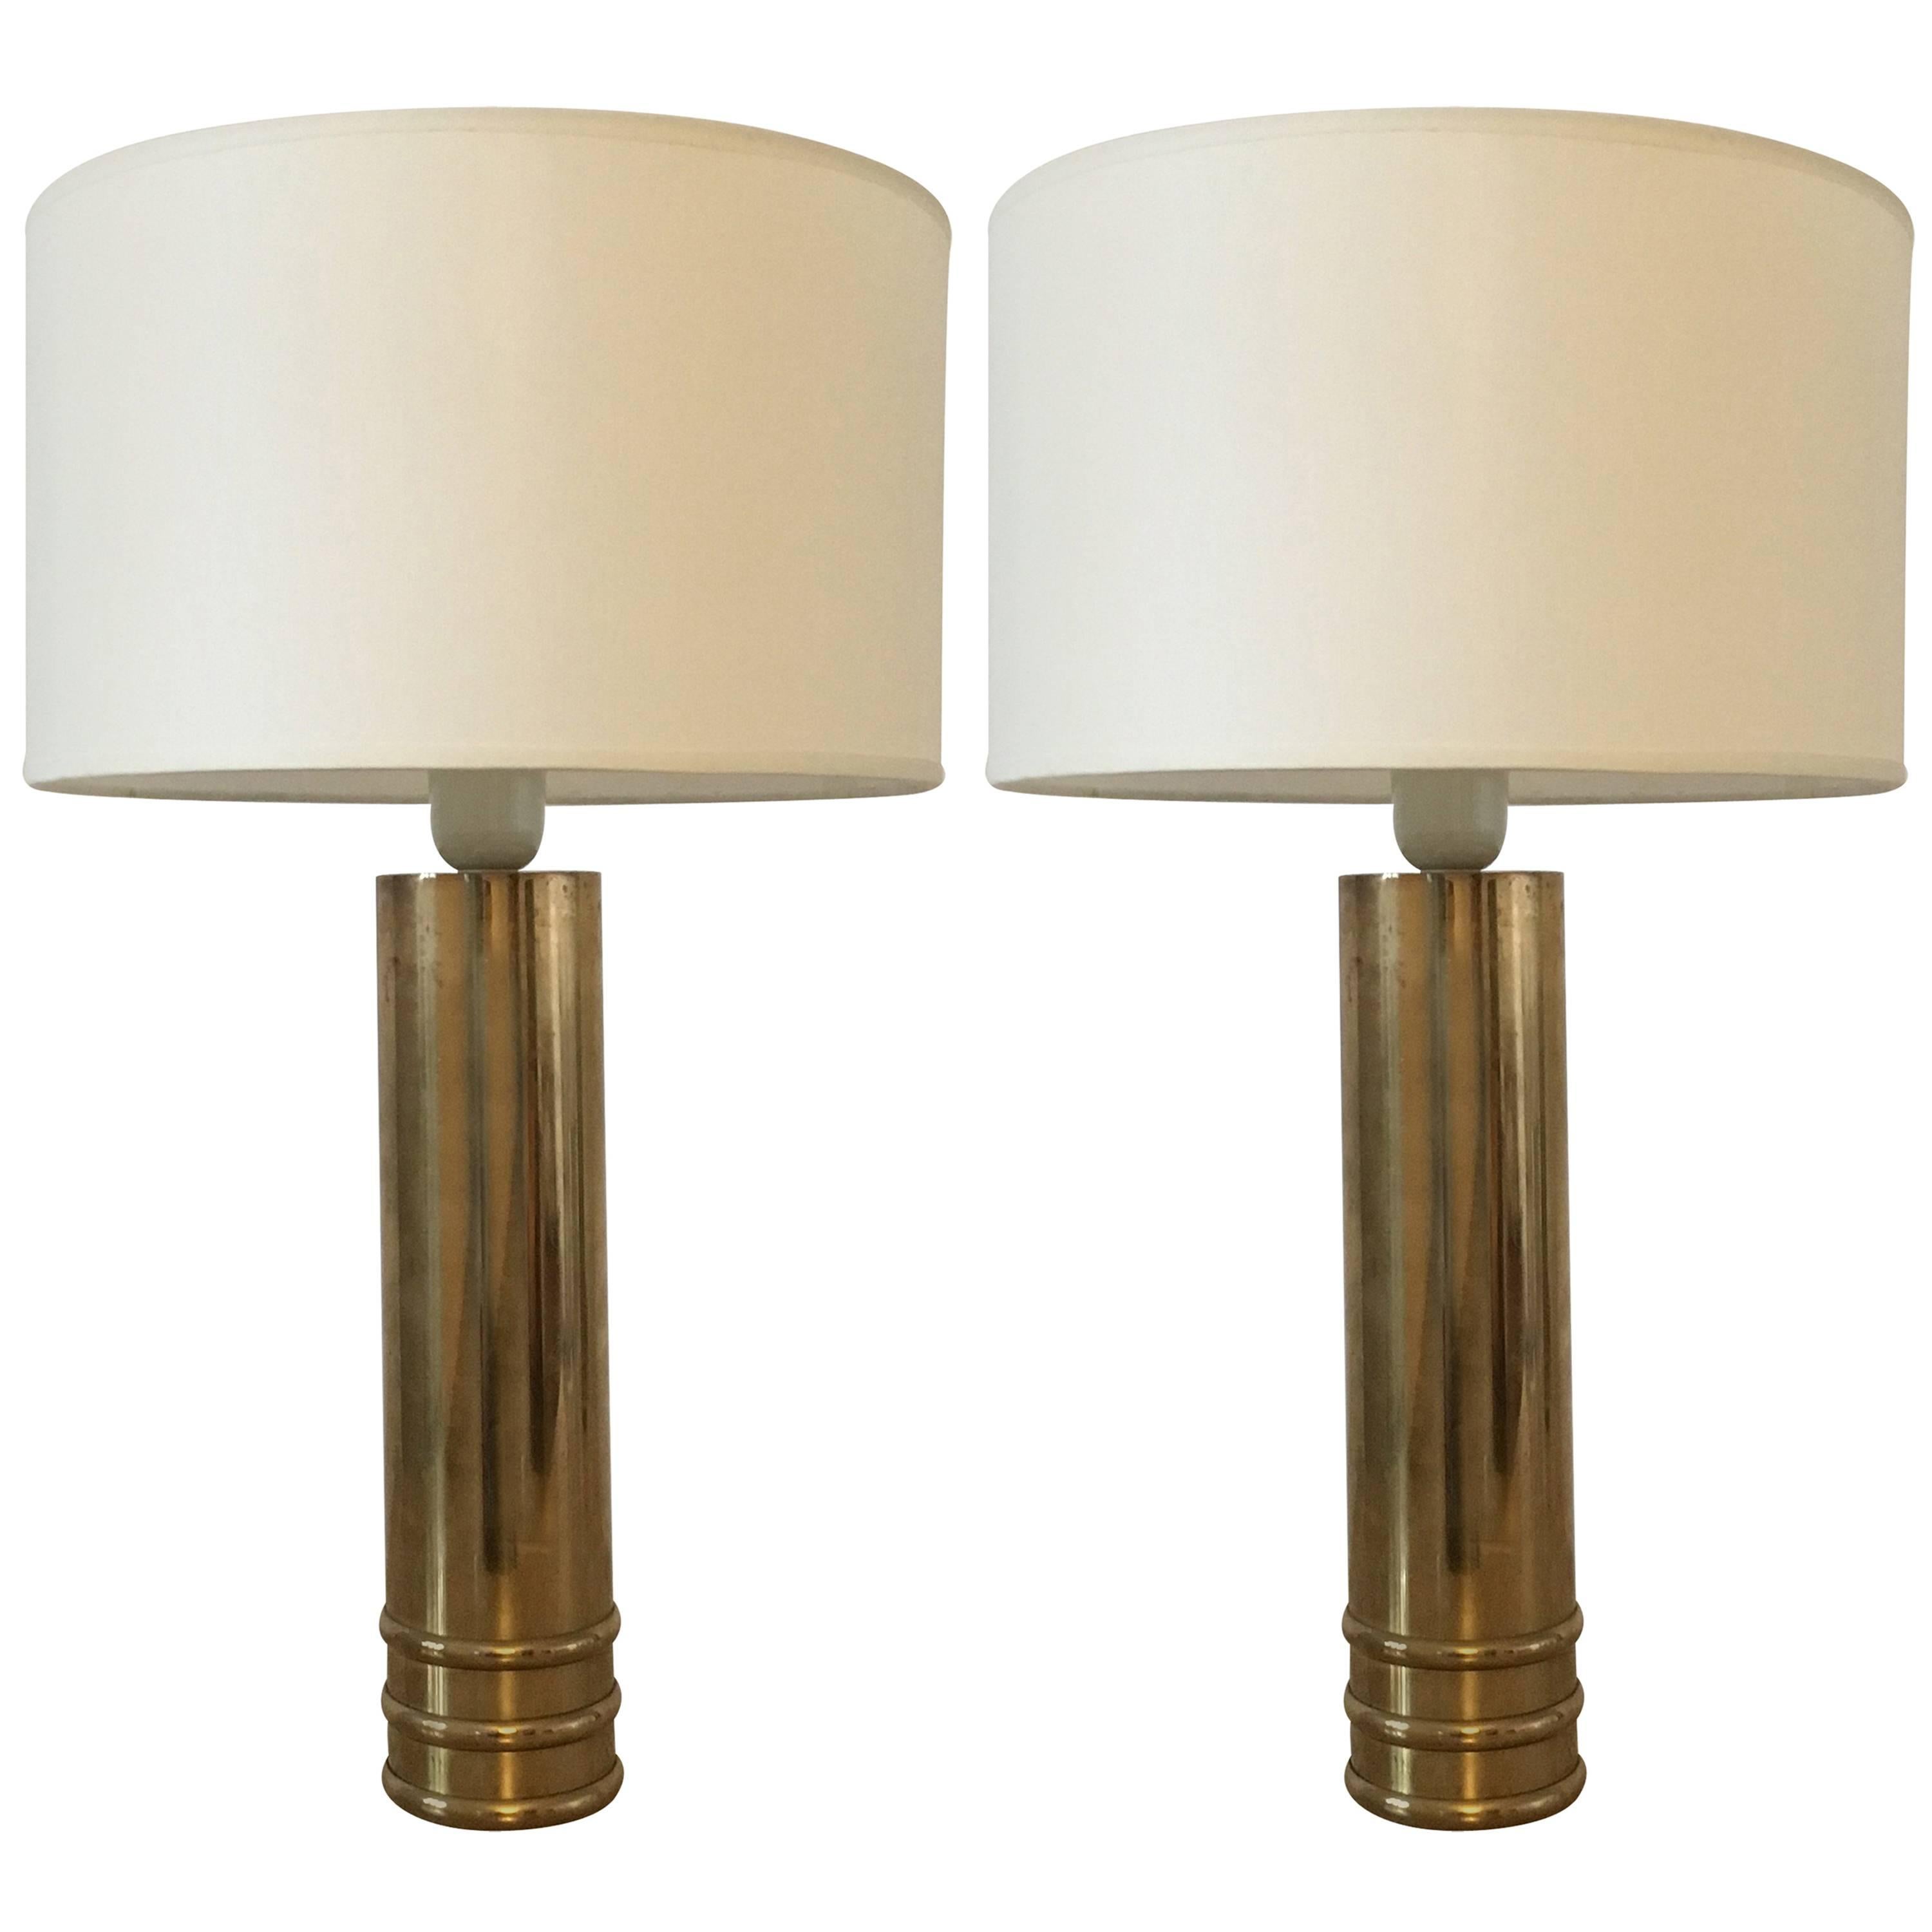 Pair of Brass Table Lamps by Bergboms, Sweden, circa 1960 For Sale